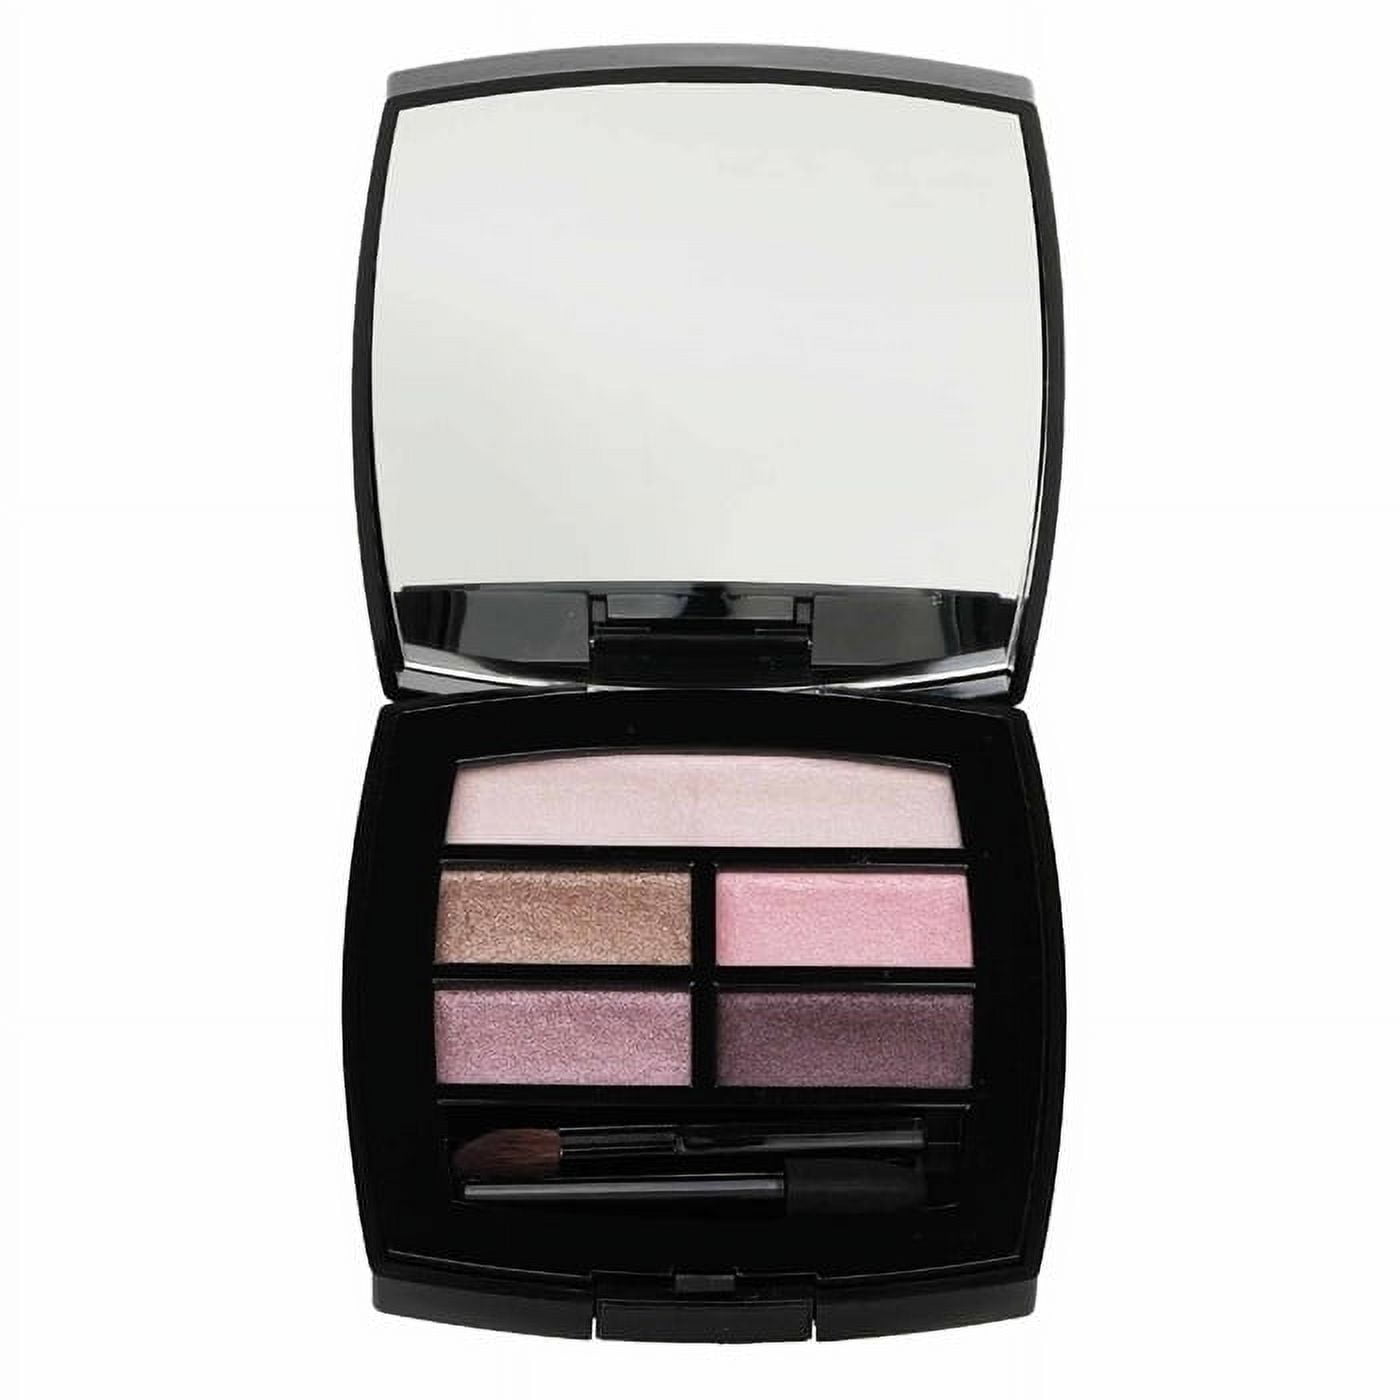 Chanel Les Beiges Healthy Glow Natural Eyeshadow Palette - # Light